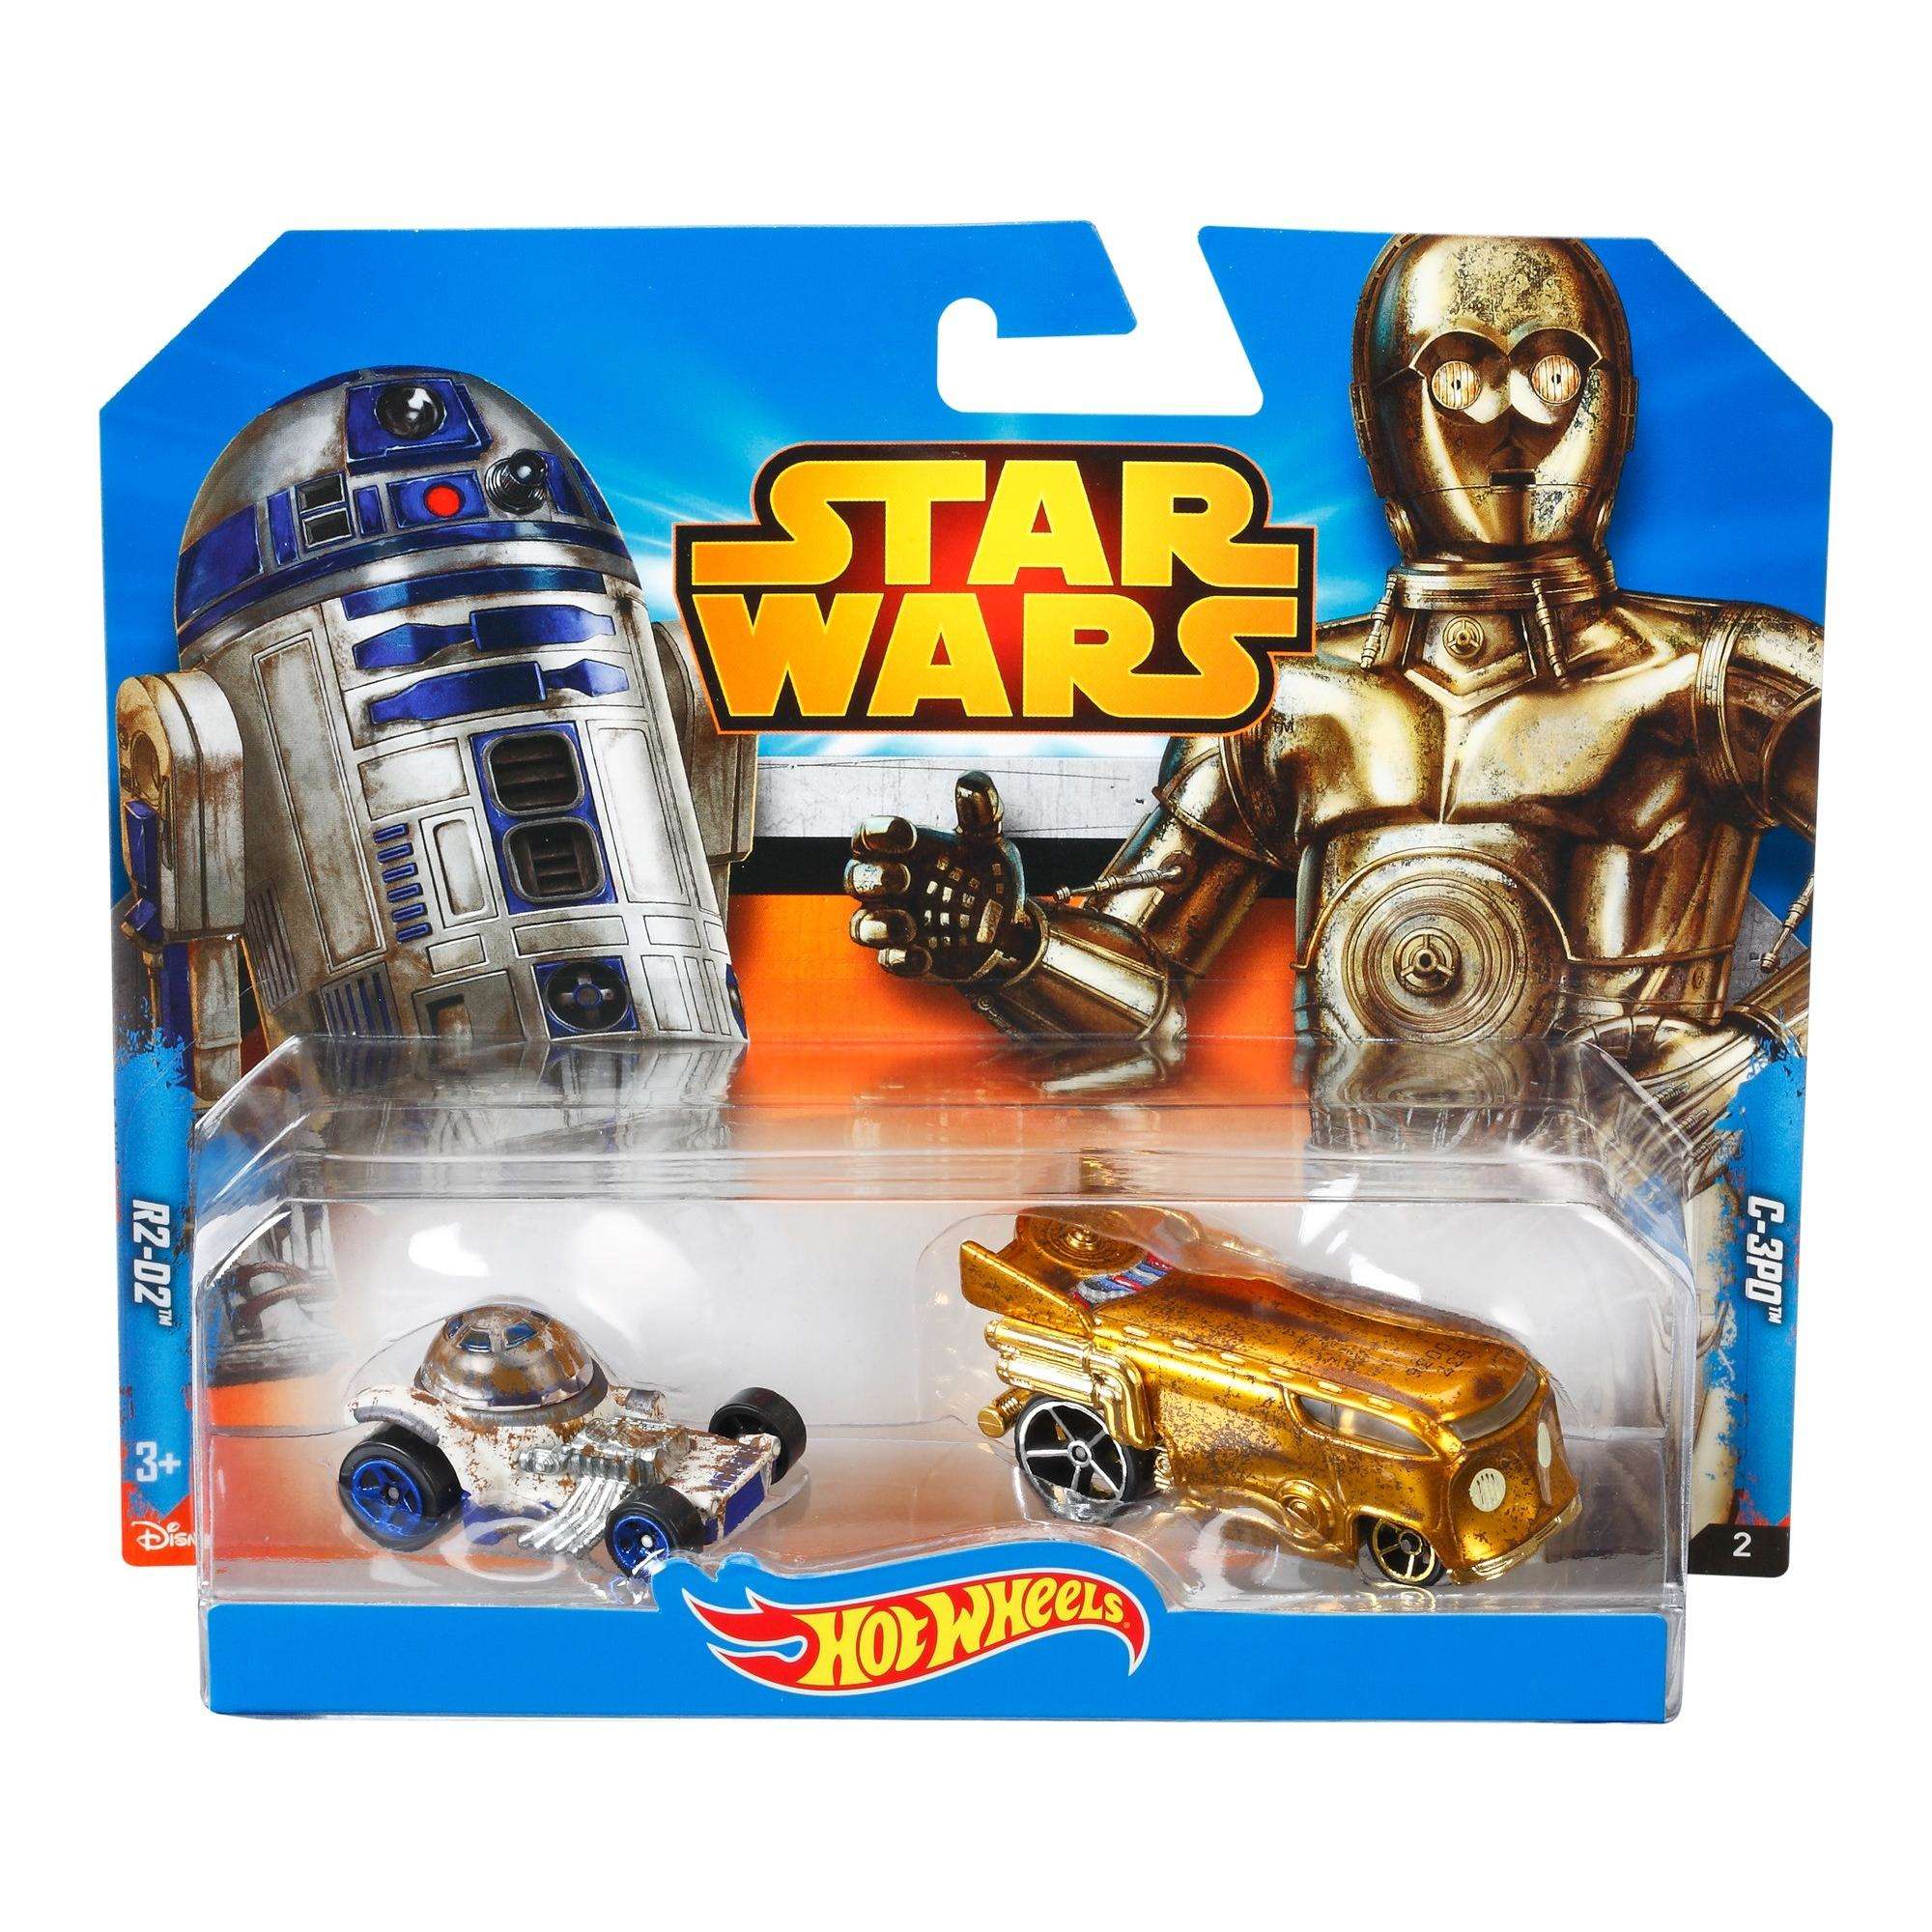 Star Wars Hot Wheels C-3PO & R2-D2 Character Vehicles (2014) Mattel Toy Car 2-Pack - image 4 of 5